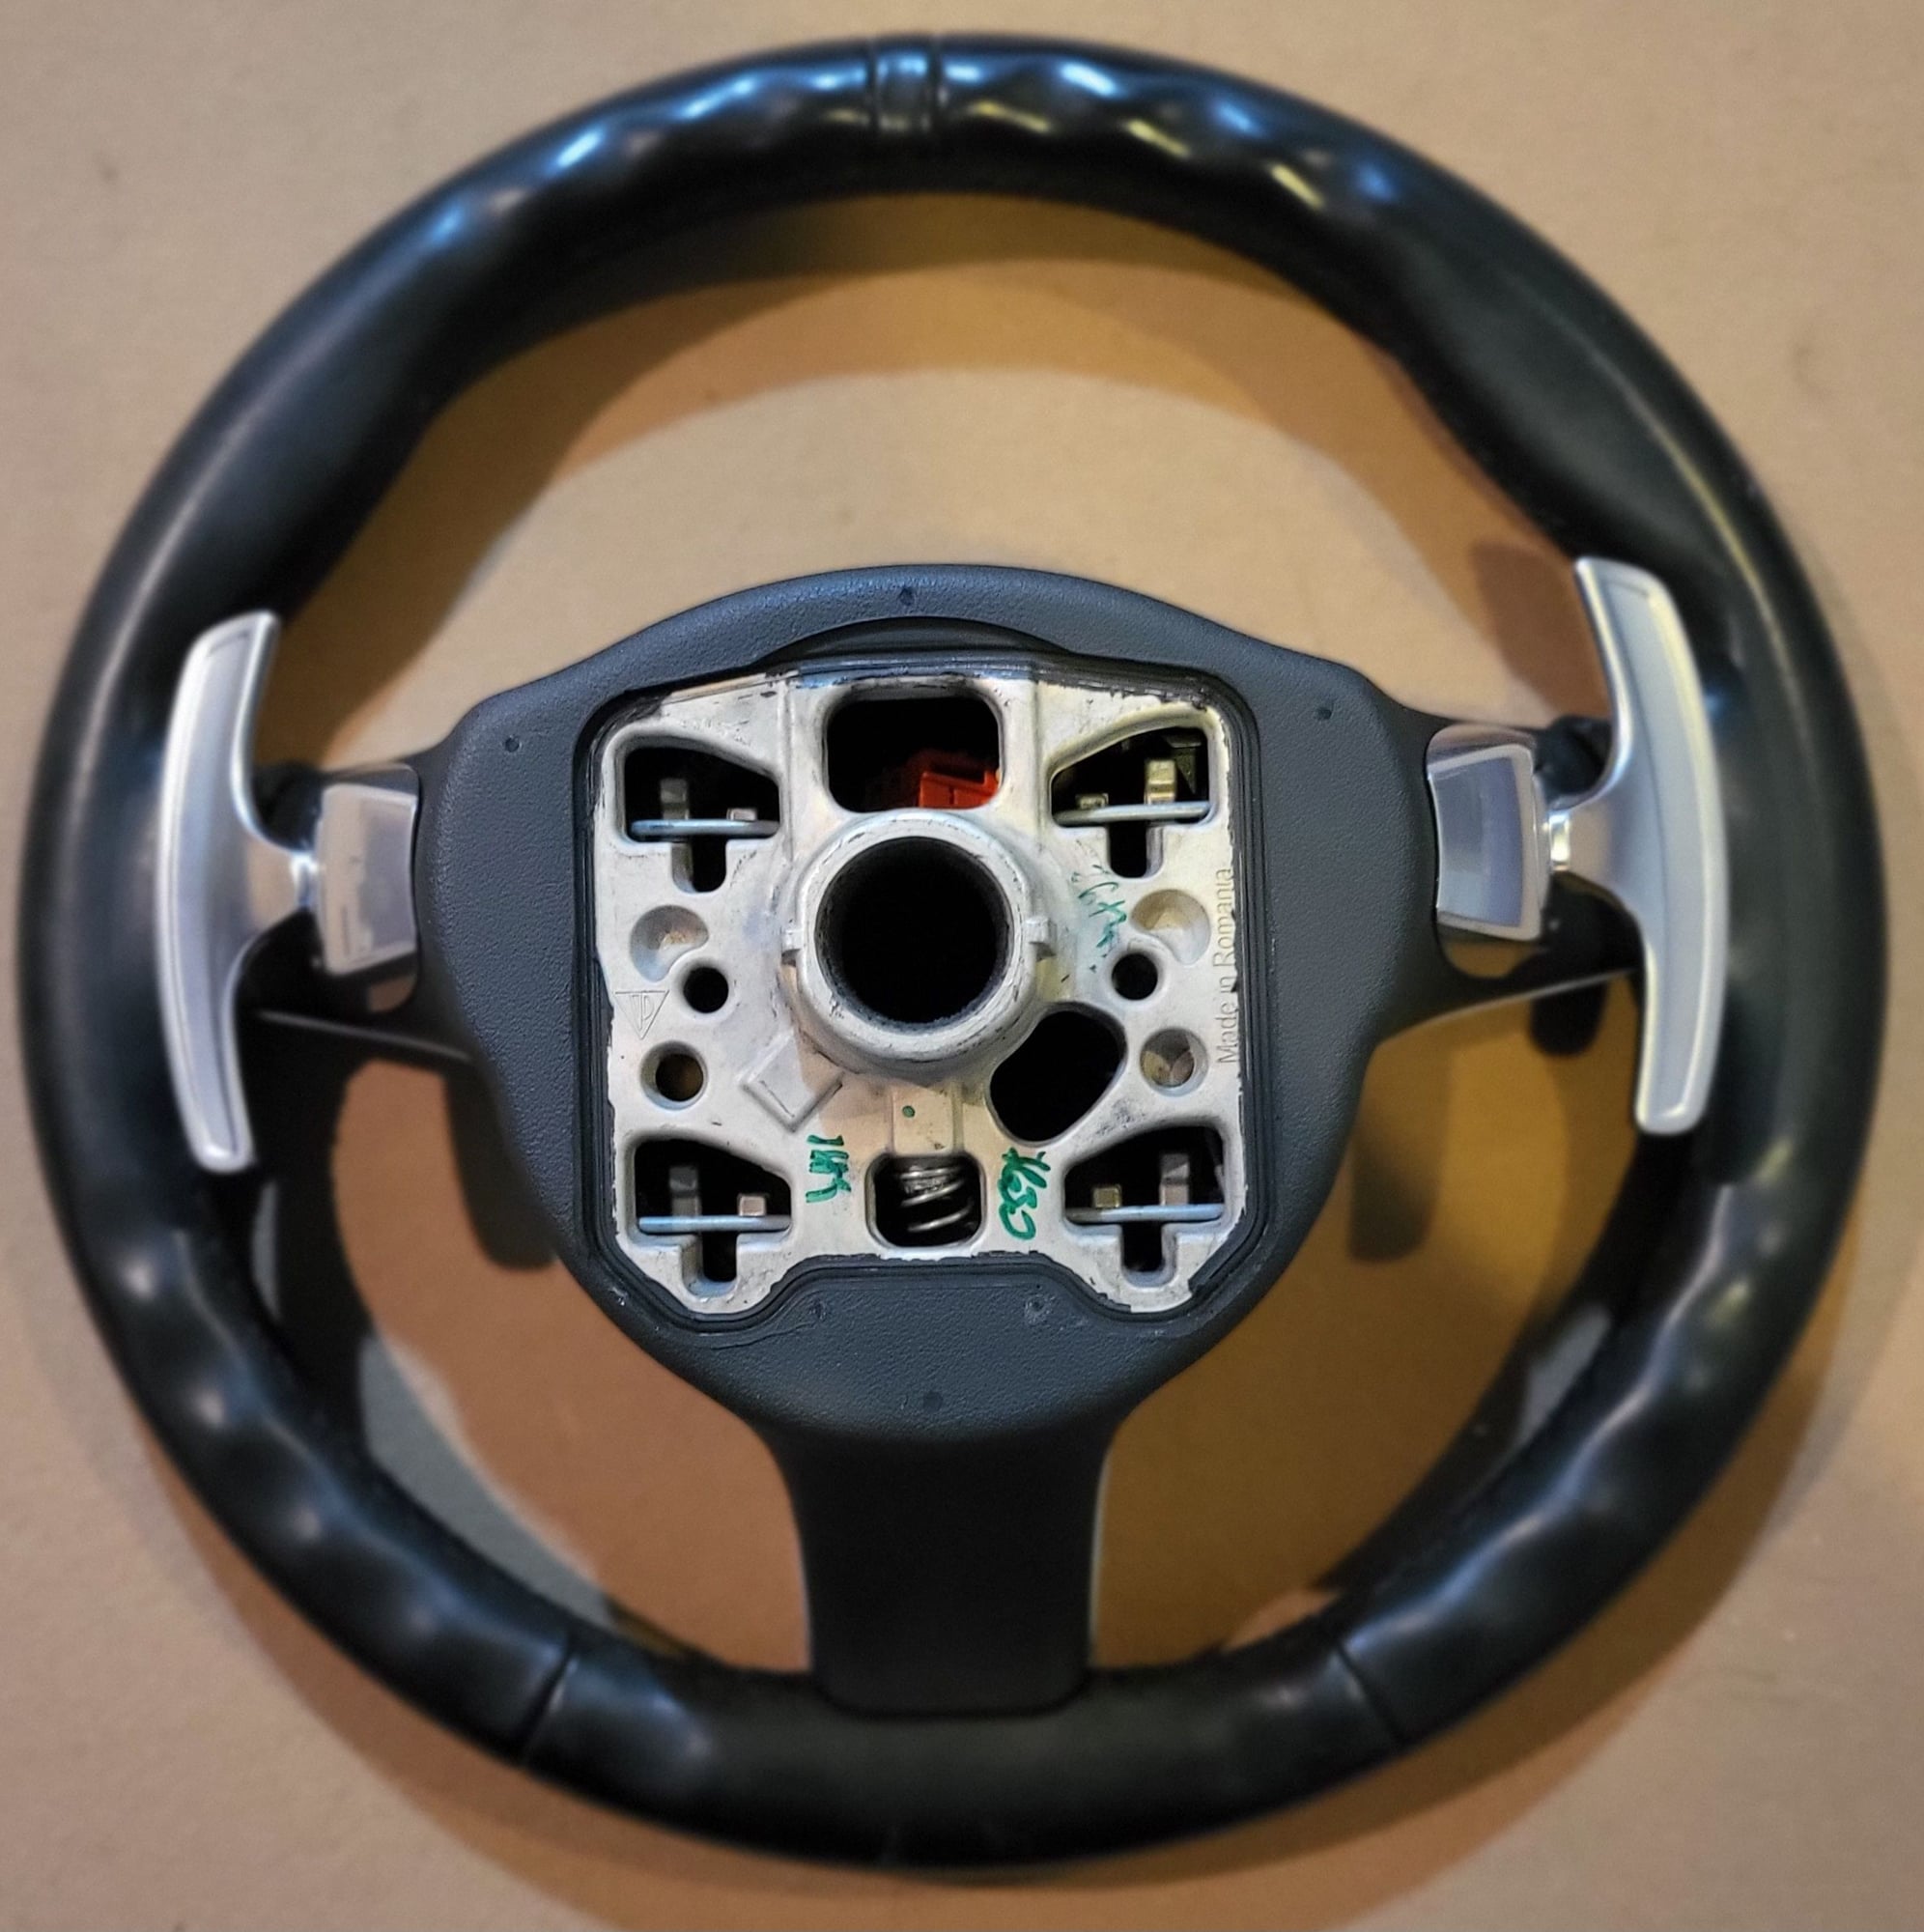 Steering/Suspension - Used OEM Porsche 911 991.1 PDK Steering Wheel Airbag Included - Used - 2013 to 2019 Porsche 911 - 2011 to 2019 Porsche Macan - 2013 to 2016 Porsche 718 Boxster - 2013 to 2016 Porsche Cayman - North Las Vegas, NV 89084, United States